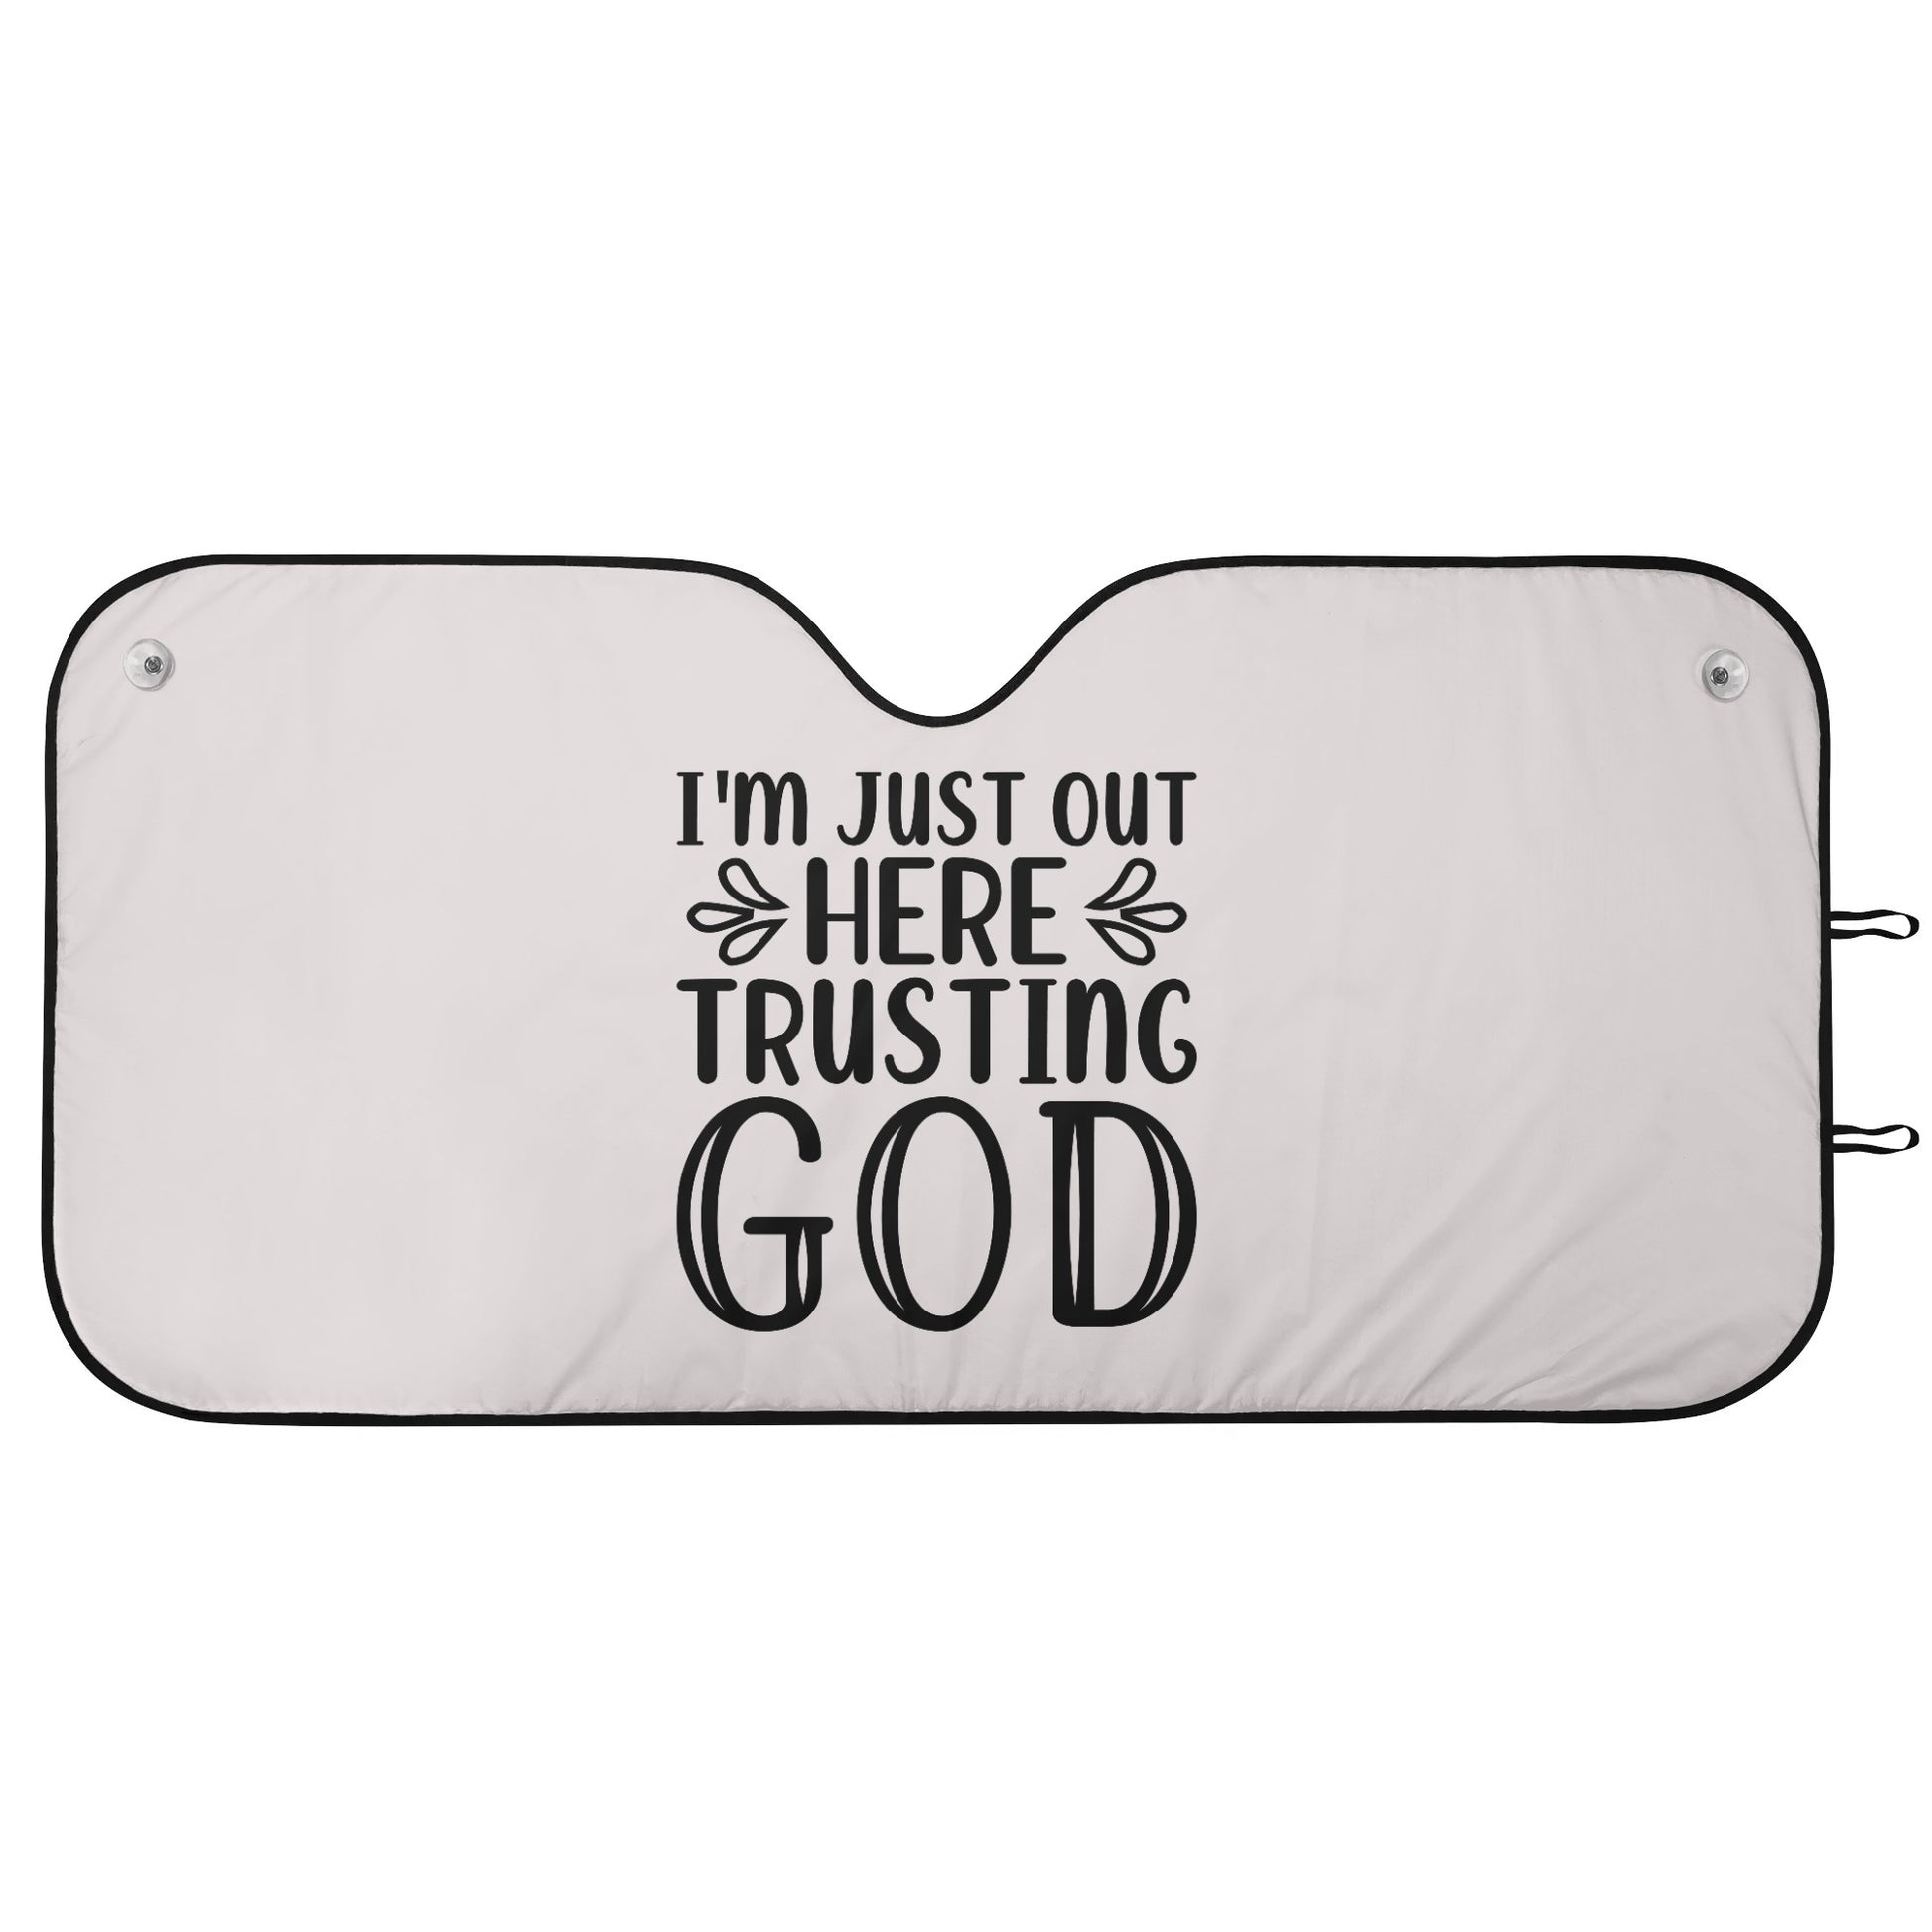 Im Just Out Here Trusting God Car Sunshade Christian Car Accessories popcustoms